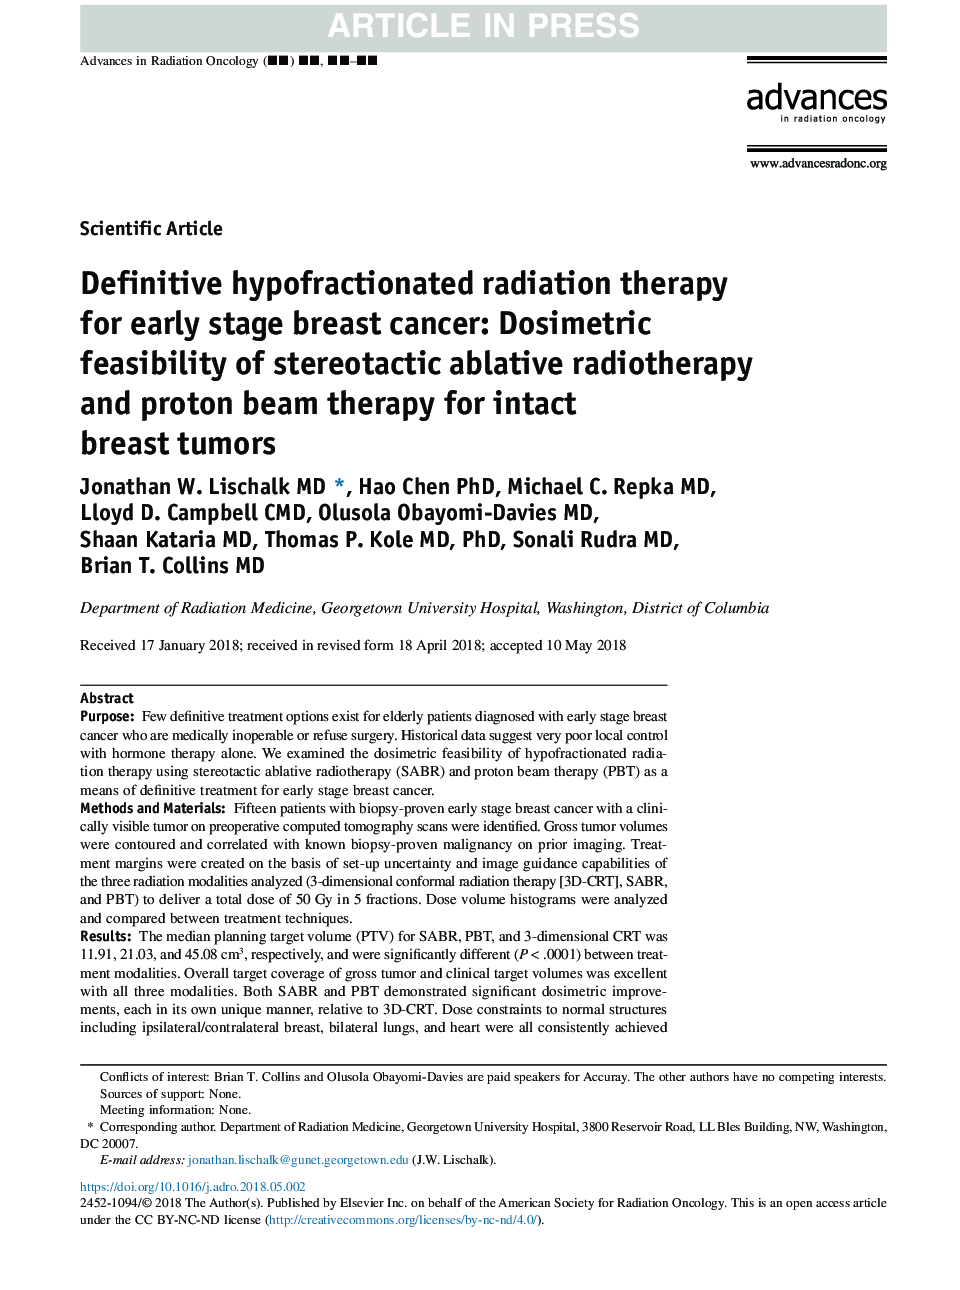 Definitive hypofractionated radiation therapy for early stage breast cancer: Dosimetric feasibility of stereotactic ablative radiotherapy and proton beam therapy for intact breast tumors